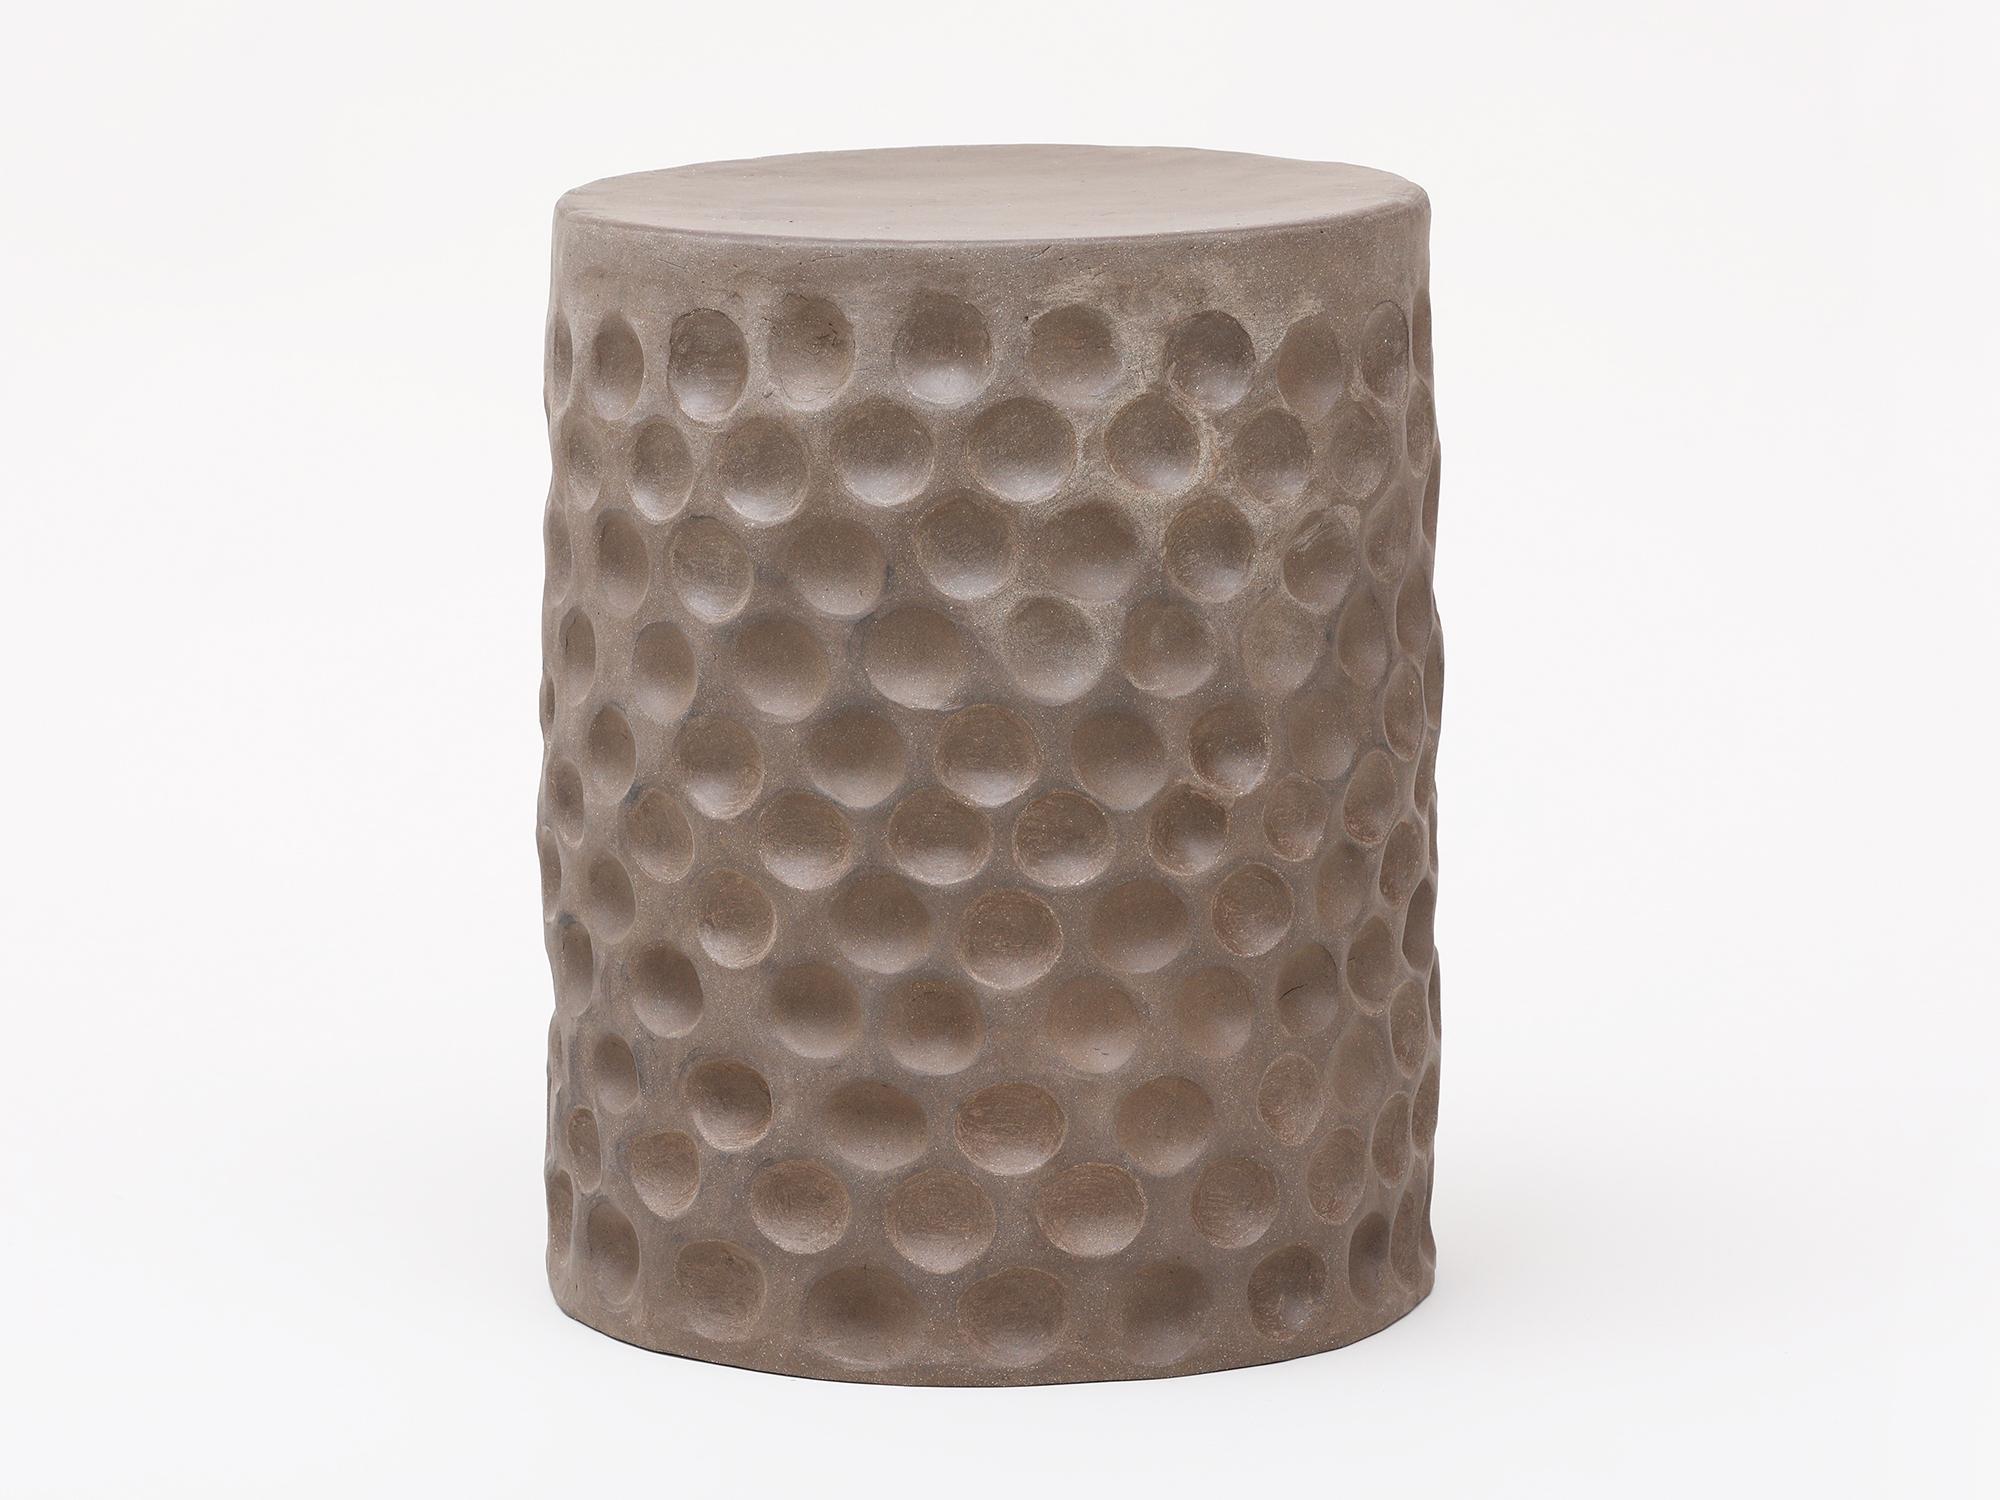 Black stoneware side table or stool, with a flat top and a textural circle pattern on the sides. Handmade in New York by artist Chris Wolston, perfect for indoor or outdoor use. One version is available now, more can be made to order in with an 8-10